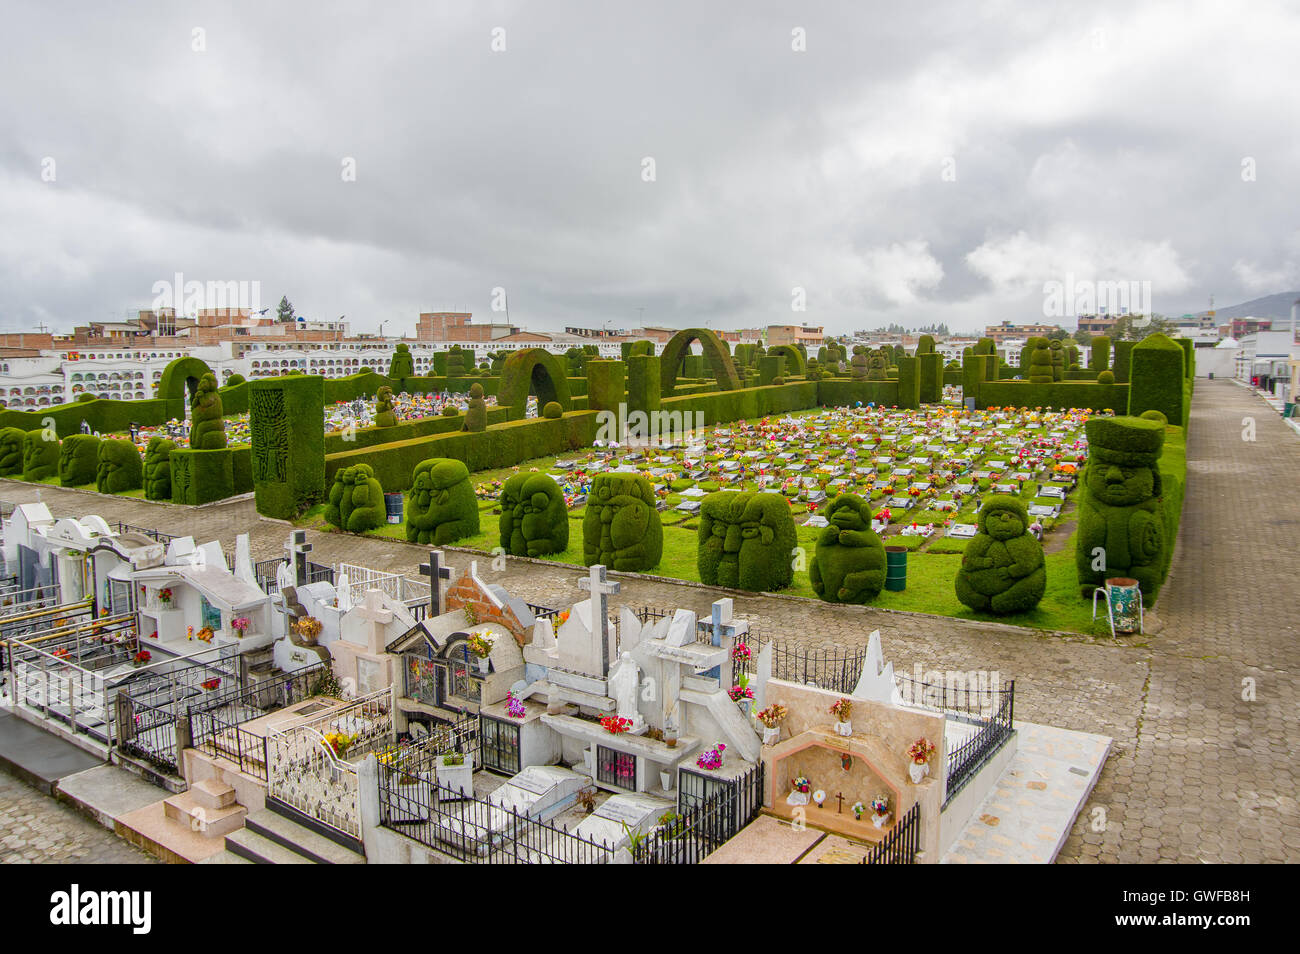 TULCAN, ECUADOR - JULY 3, 2016: aerial view of the cemetery, plants sculptures surrounding some graves Stock Photo